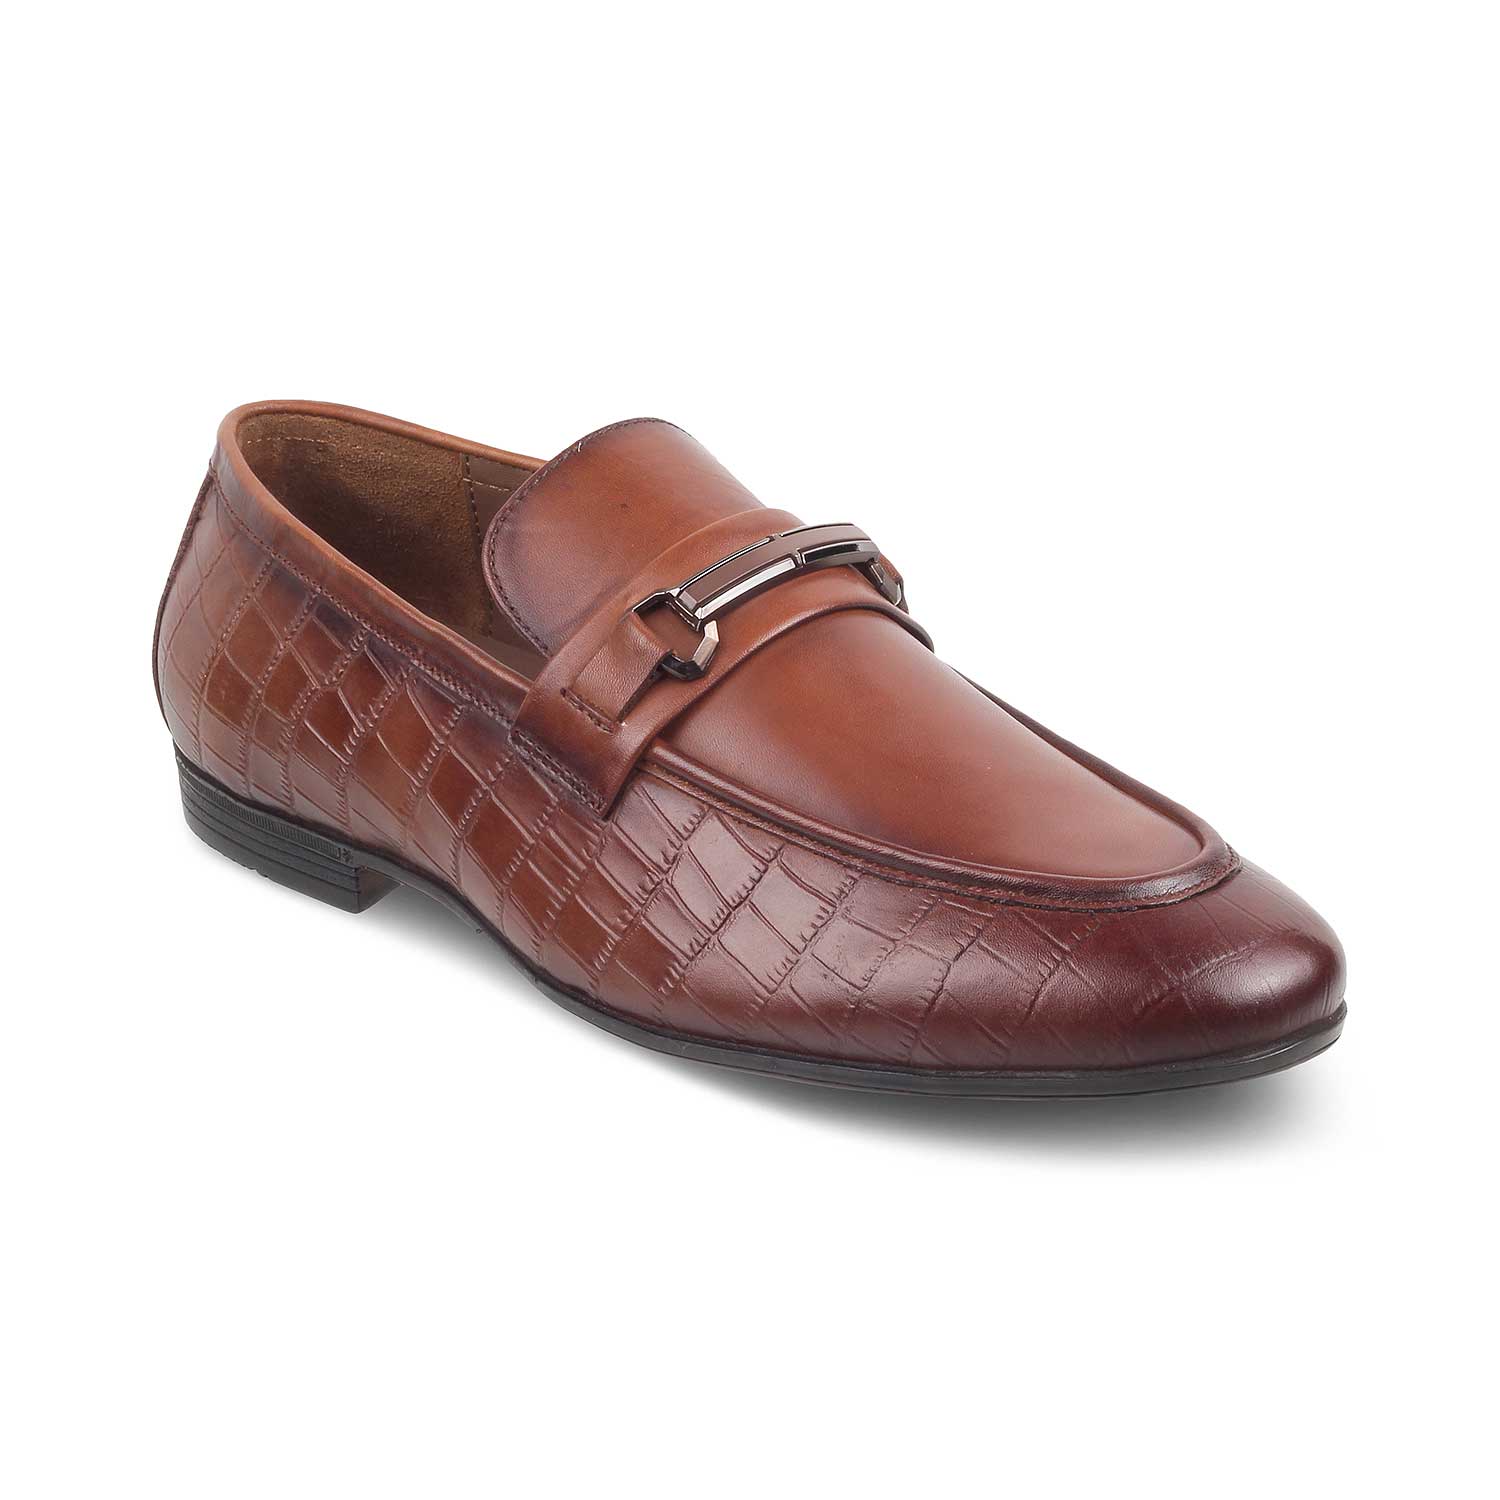 England Tan Men's Leather Loafers Online at Tresmode.com